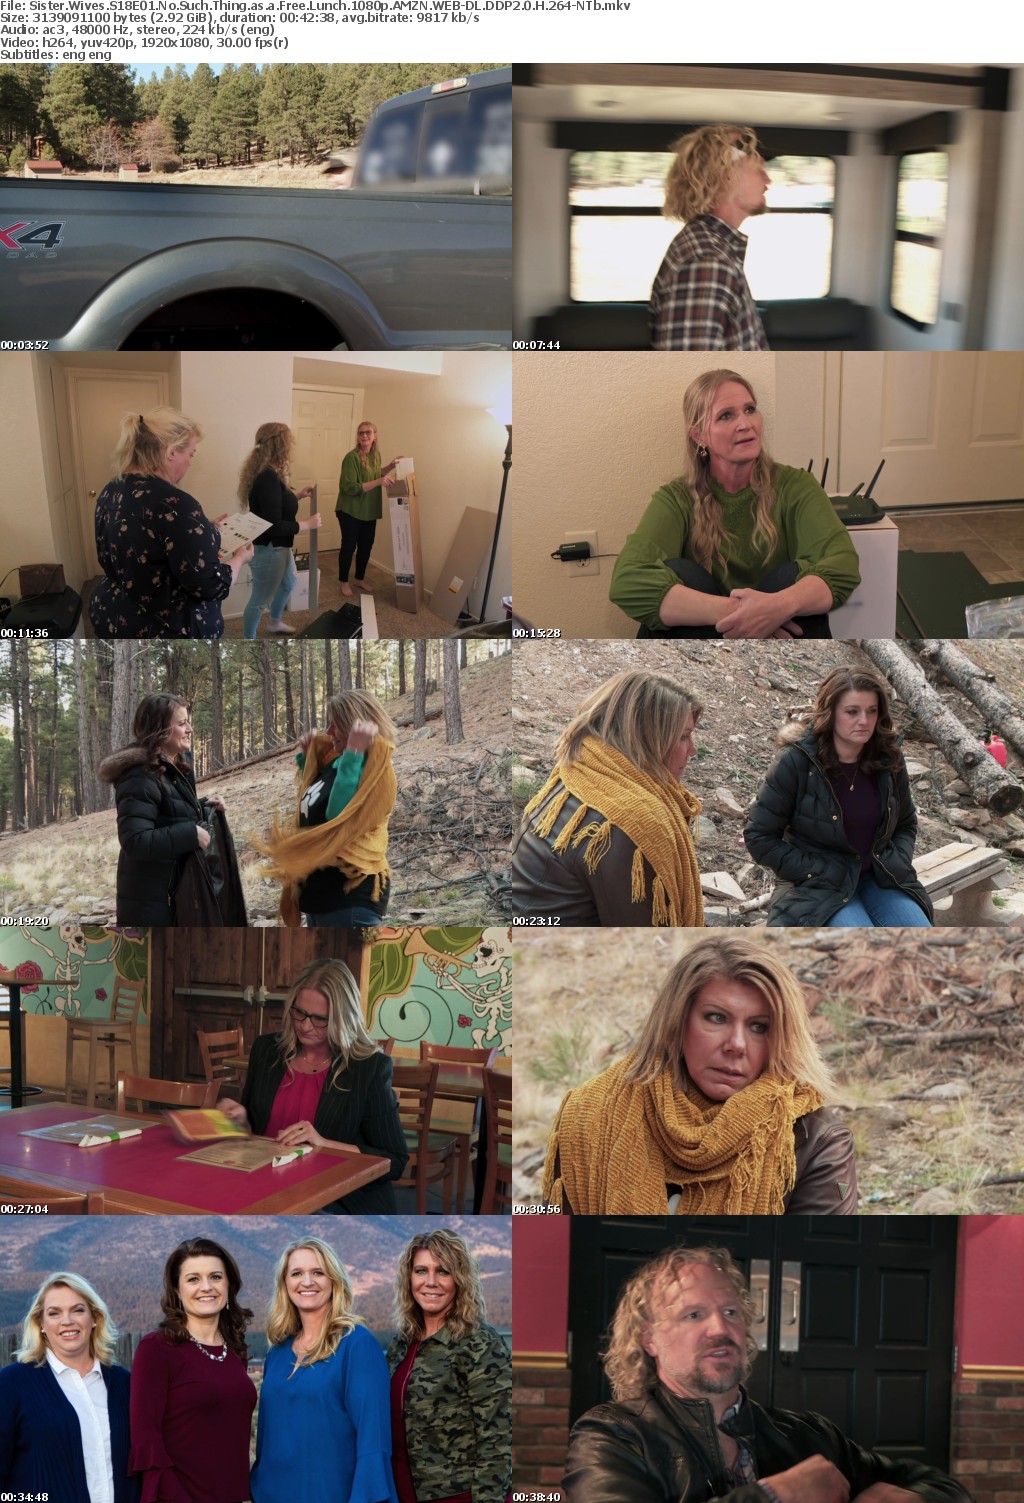 Sister Wives S18E01 No Such Thing as a Free Lunch 1080p AMZN WEB-DL DDP2 0 H 264-NTb